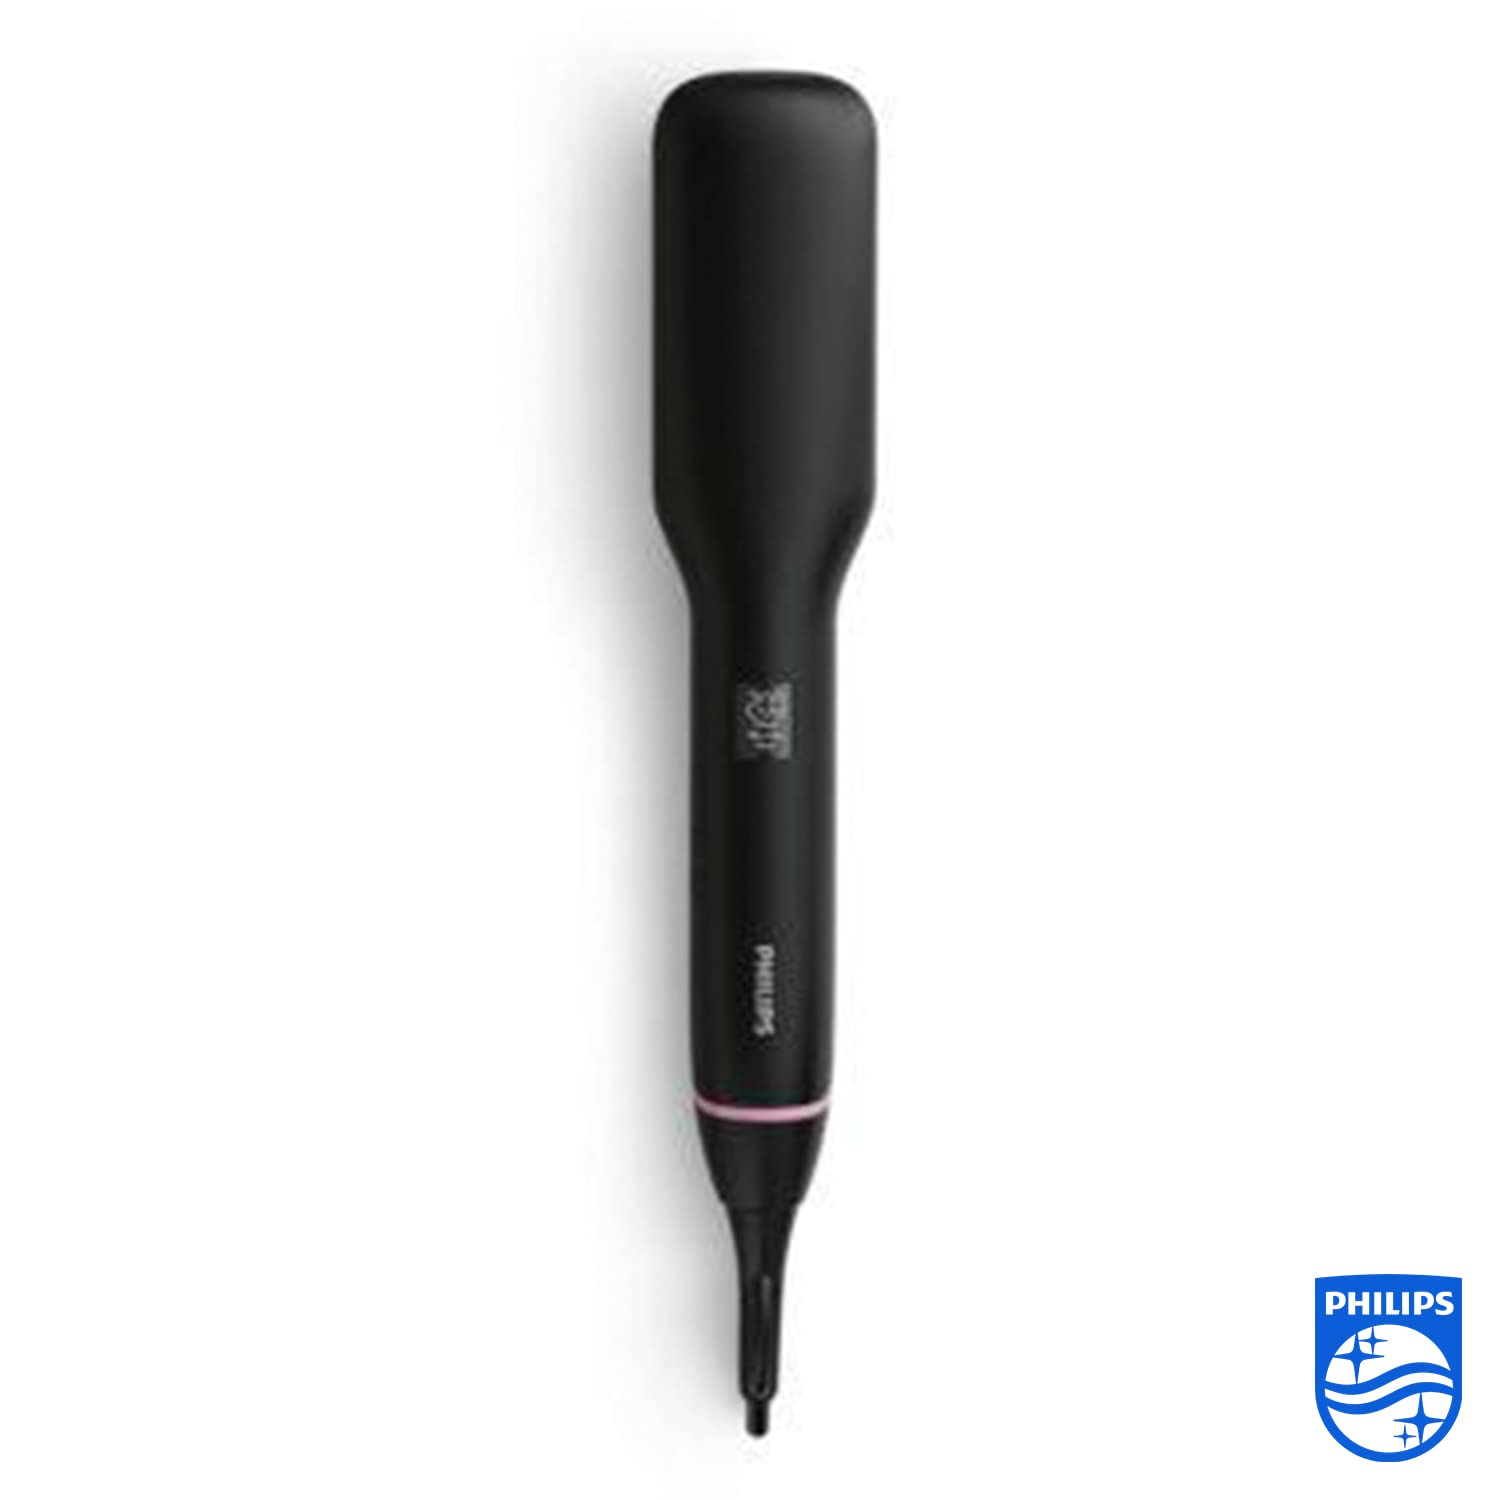 Philips Straight Care Vivid Ends Straightener | Color Black | Best Personal Care Accessories in Bahrain | Halabh